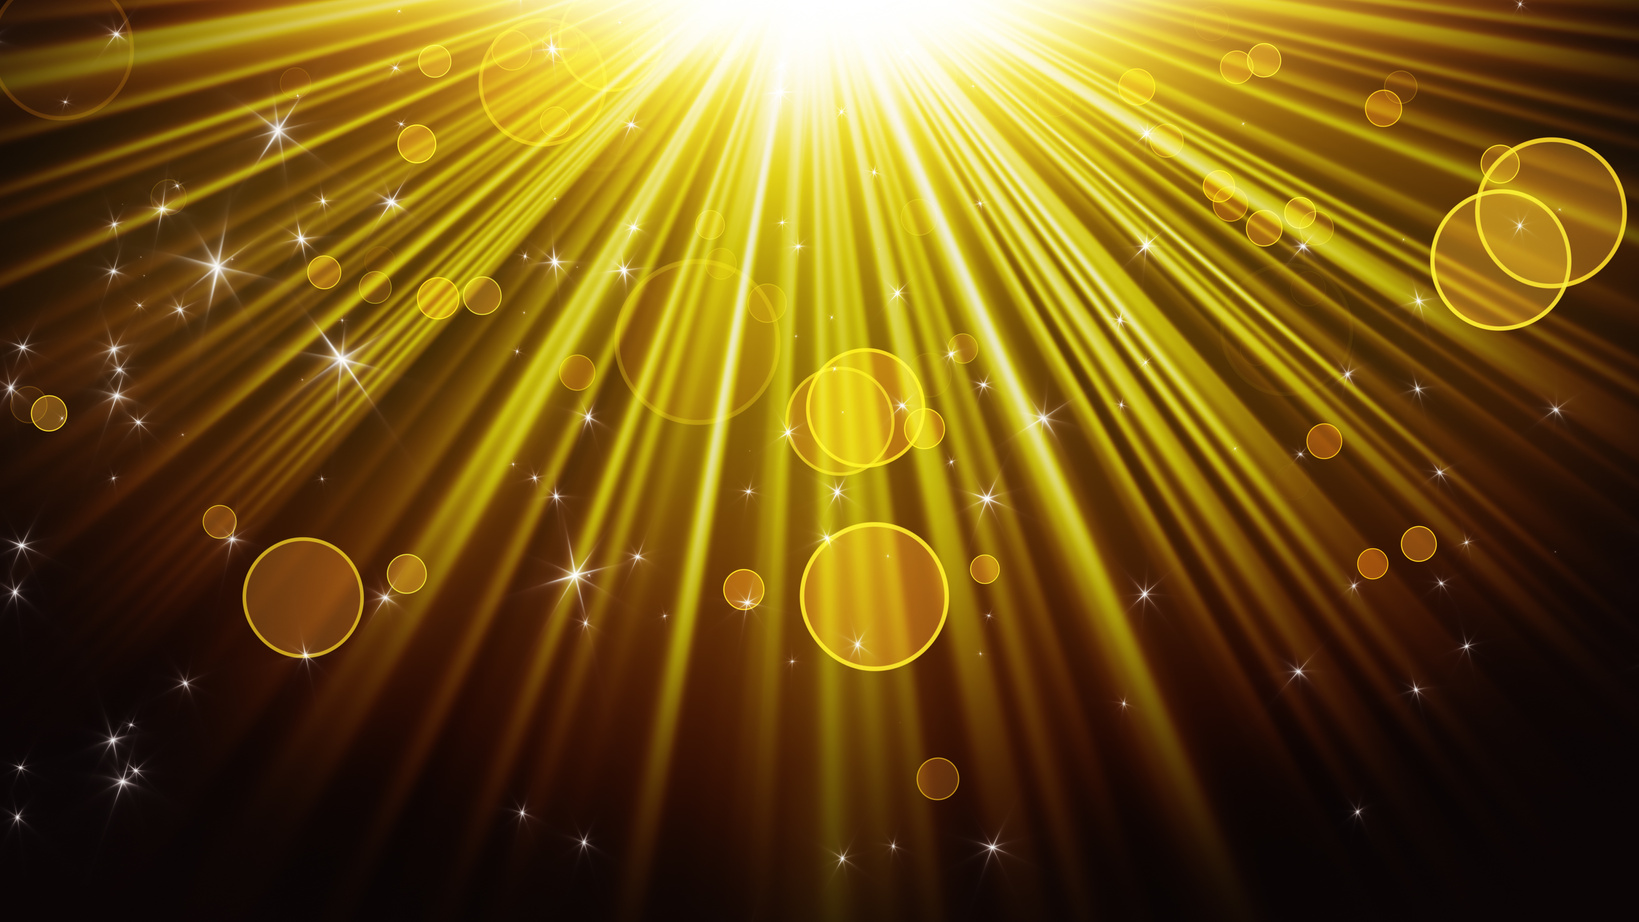 gold rays of light and shining stars abstract background